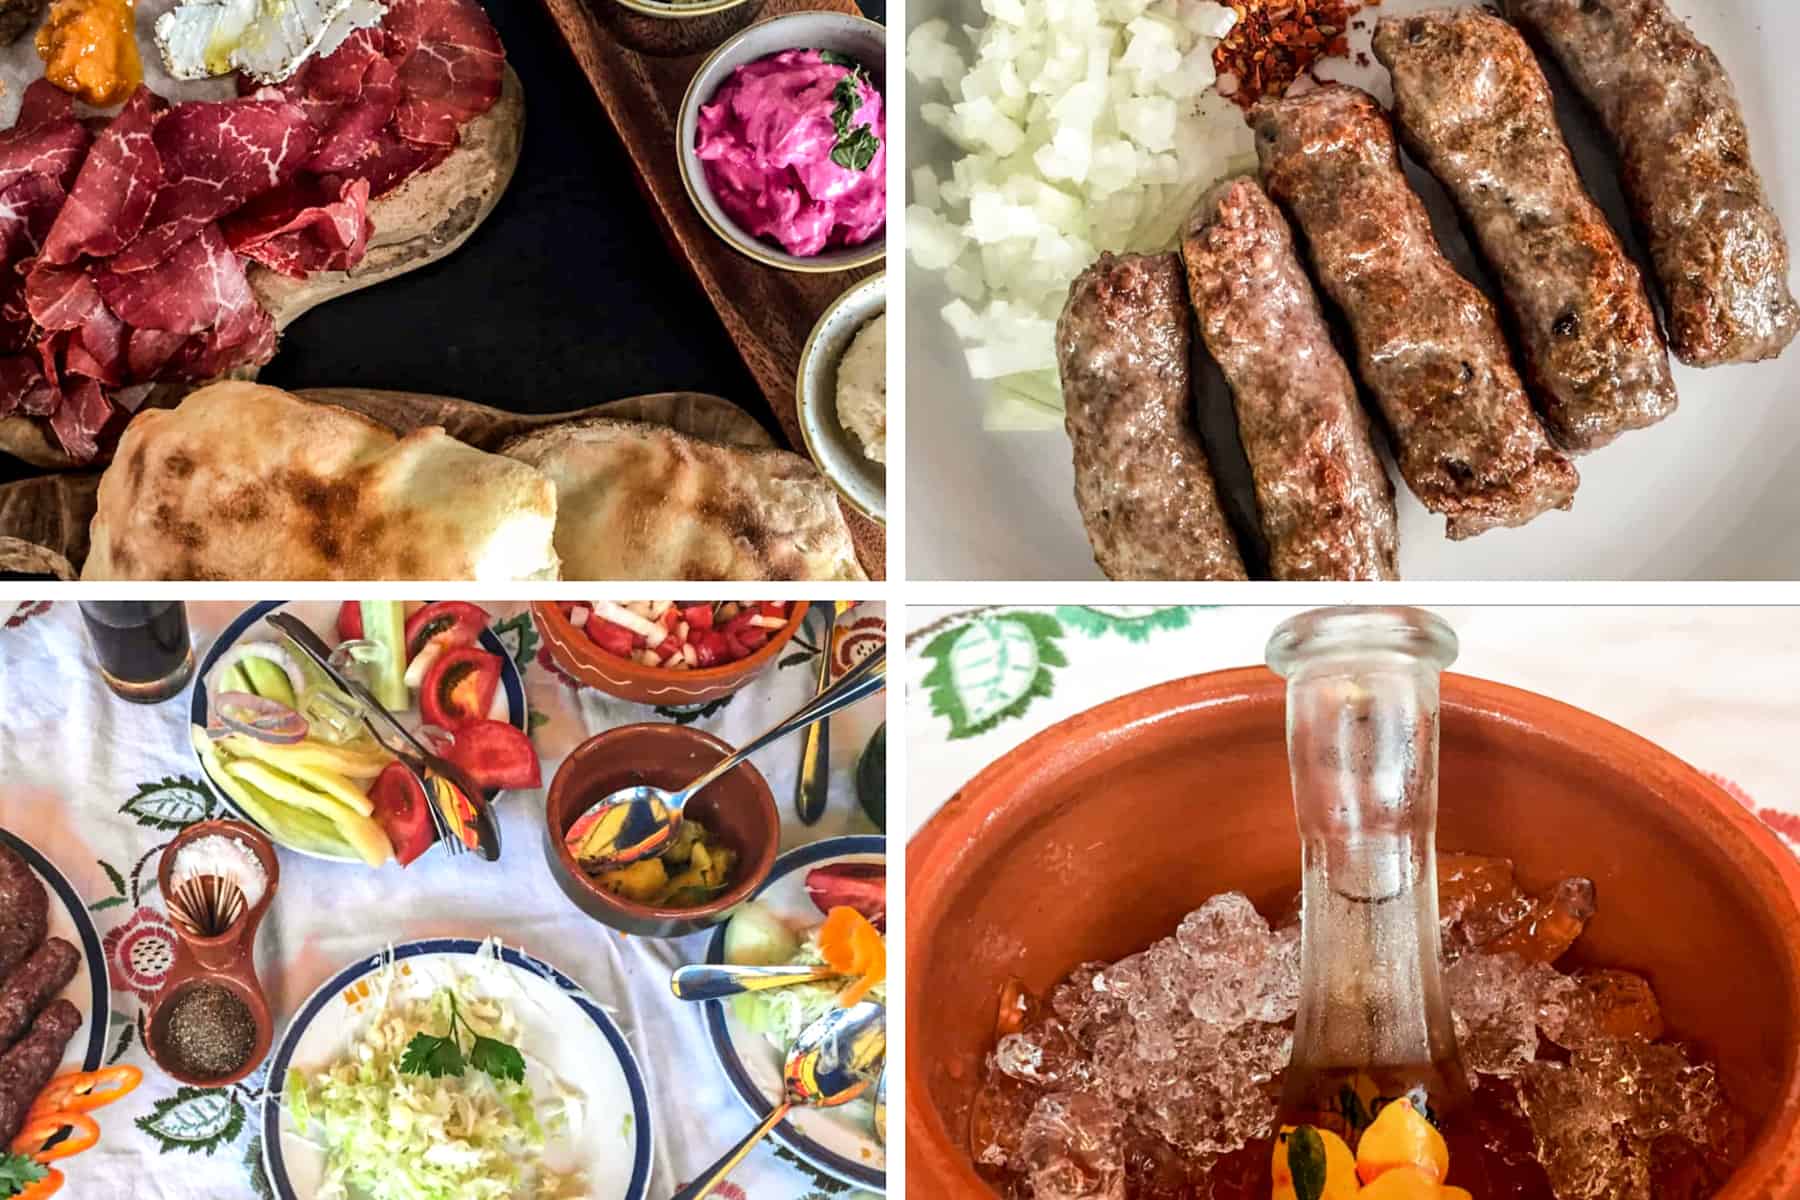 Four image showing various Serbian food dishes. Clockwise: cold cuts, bread and spreads; sausage shaped meat with chopped onions, a small bottle of alcohol in ice and a table spread of mixed salads. 